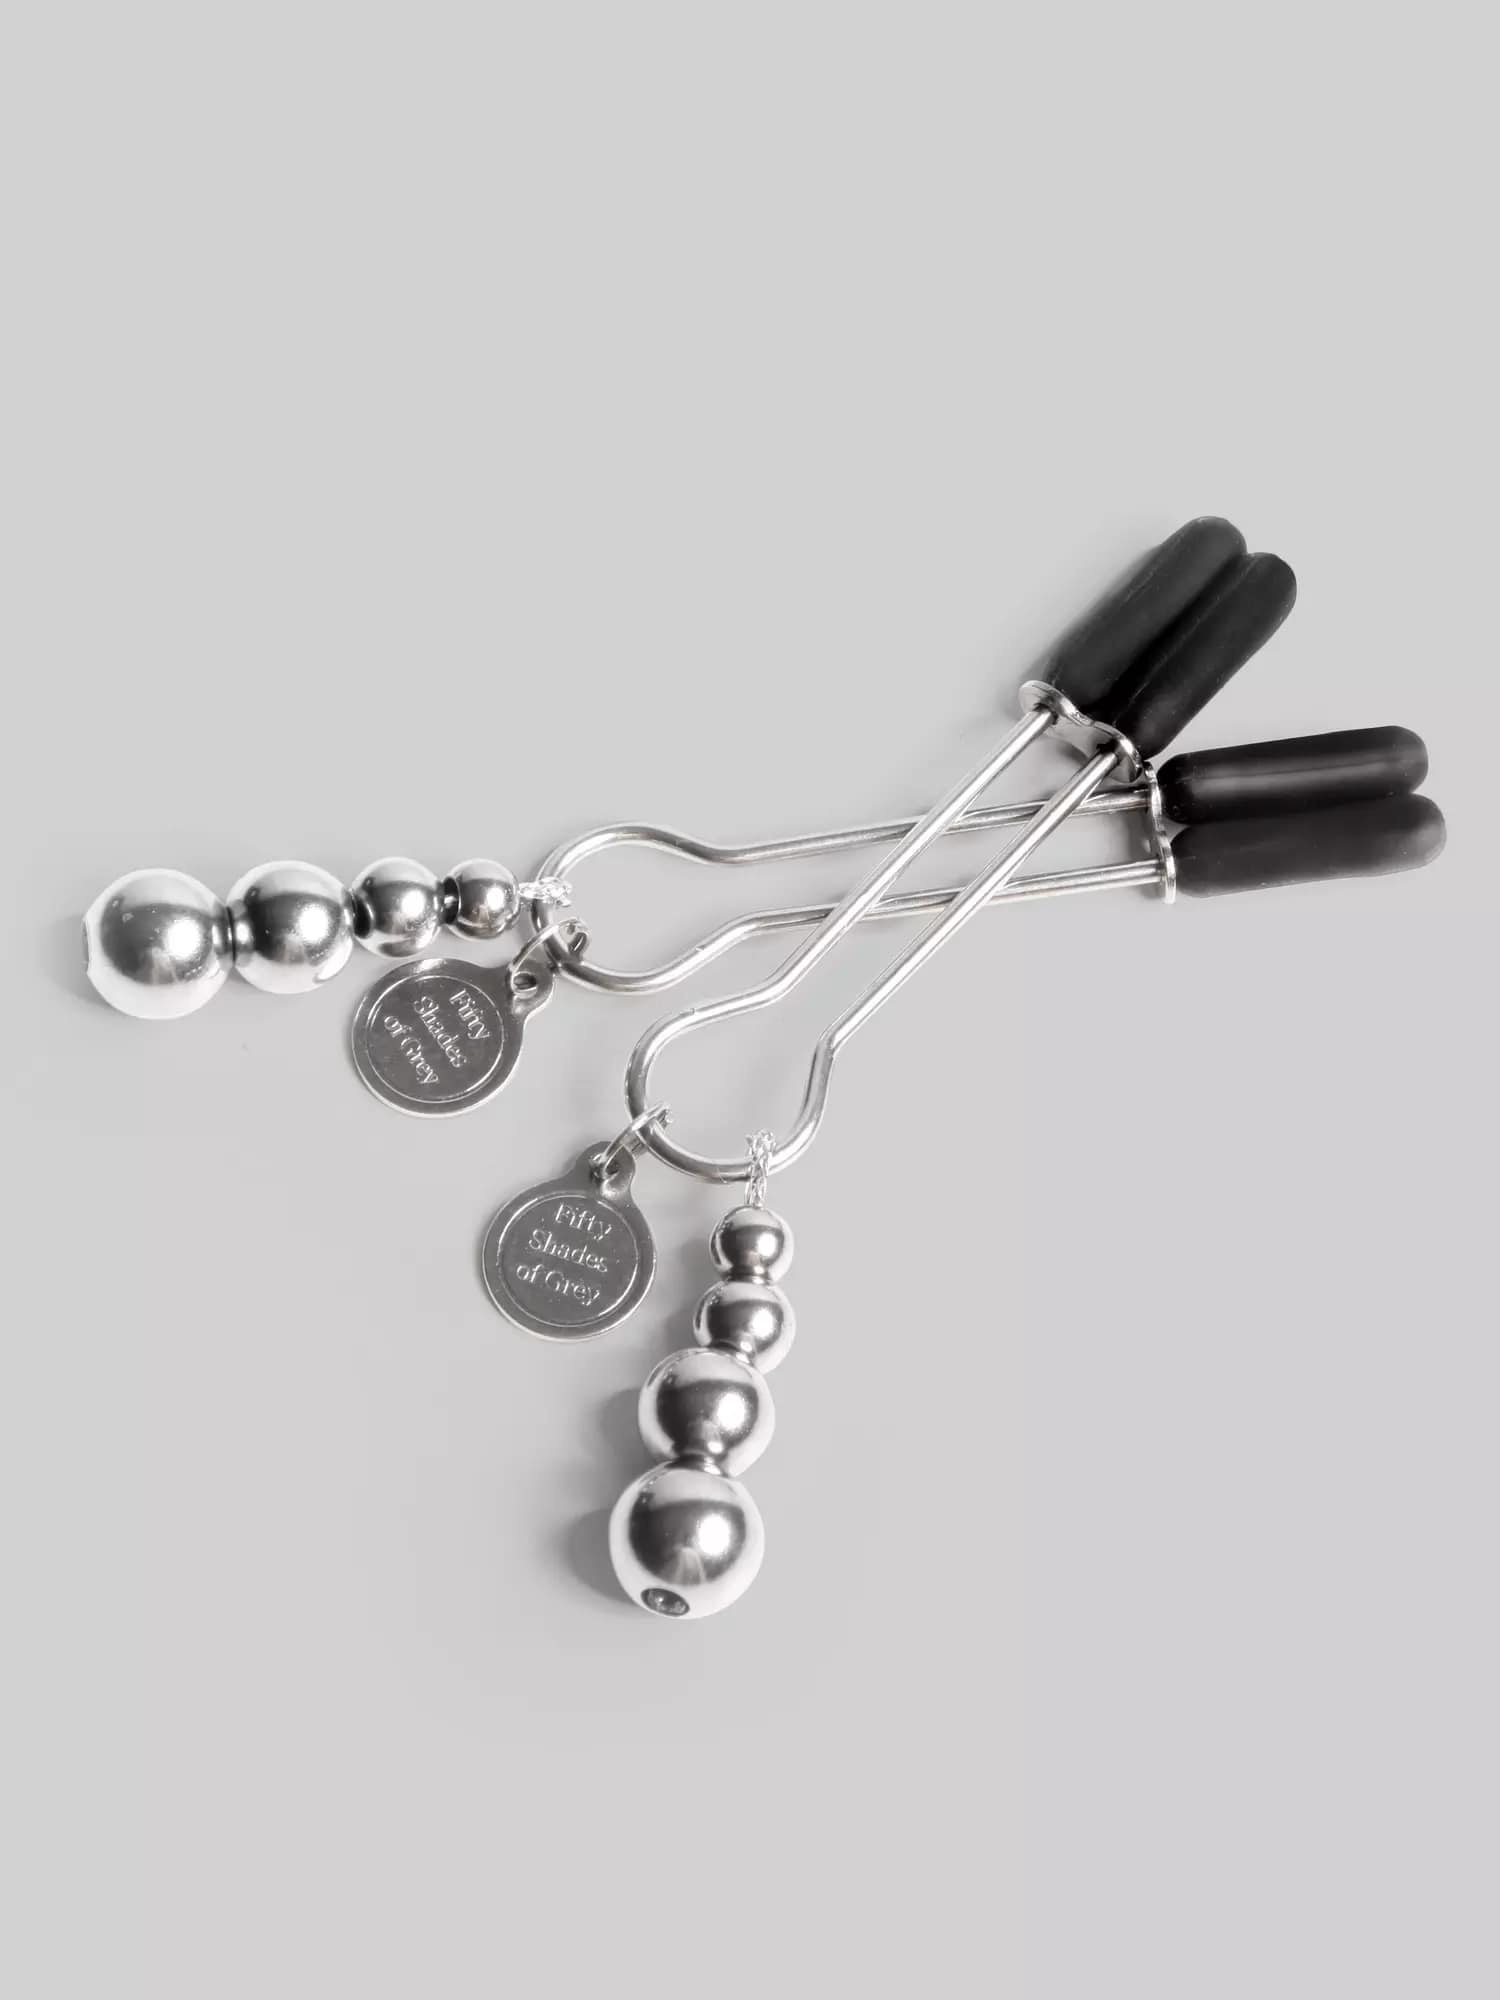 Fifty Shades of Grey Adjustable Nipple Clamps. Slide 20